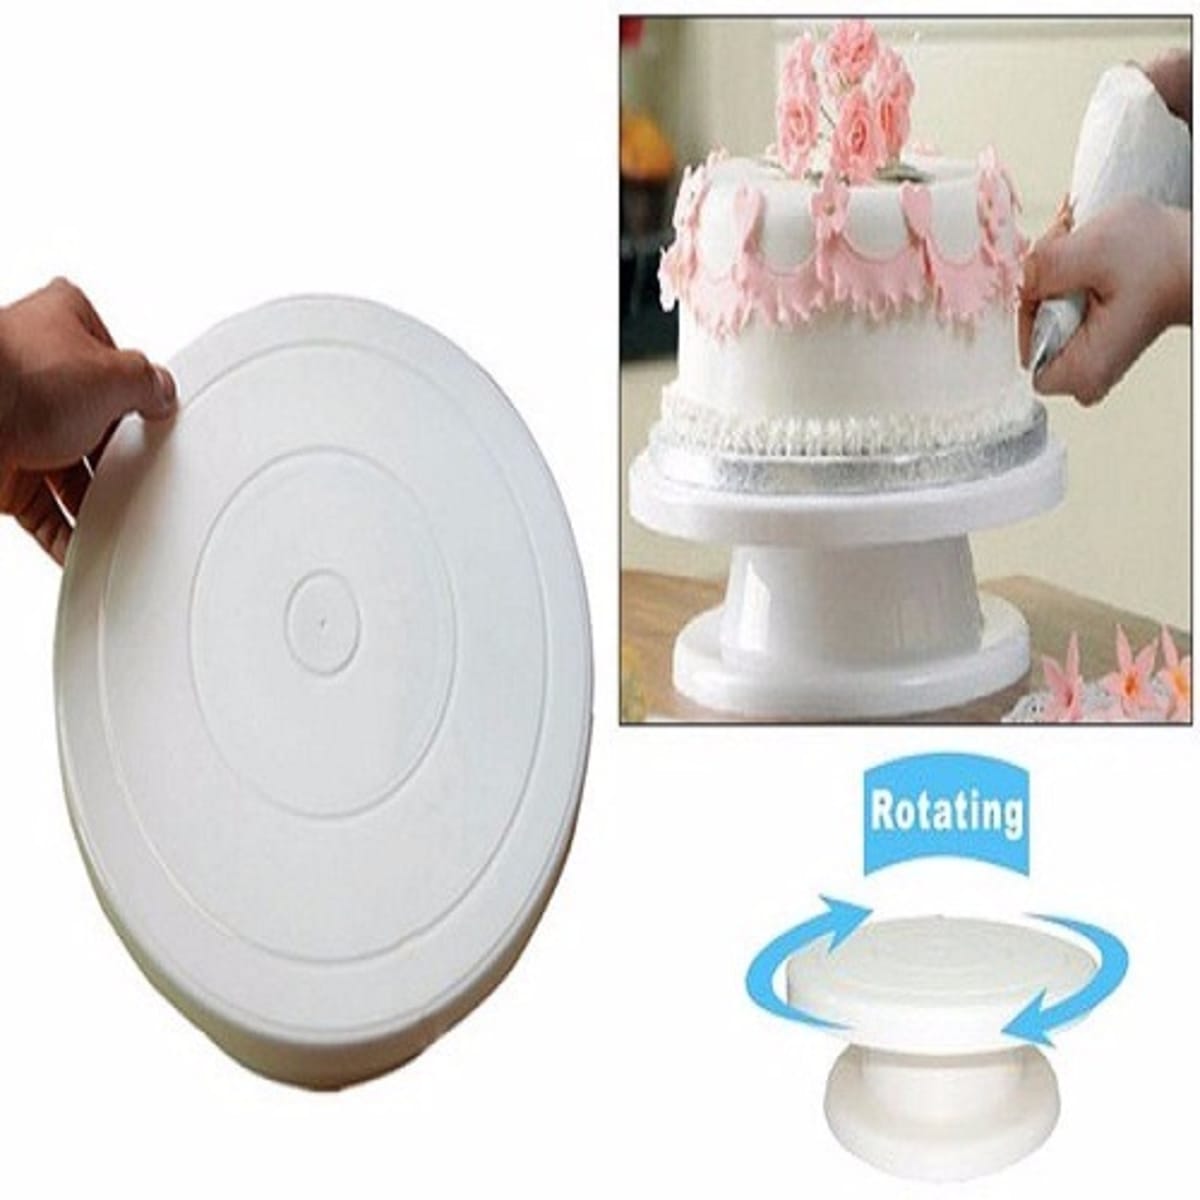 Buy Royalford Revolving Cake Stand For Icing And Leveling Cakes